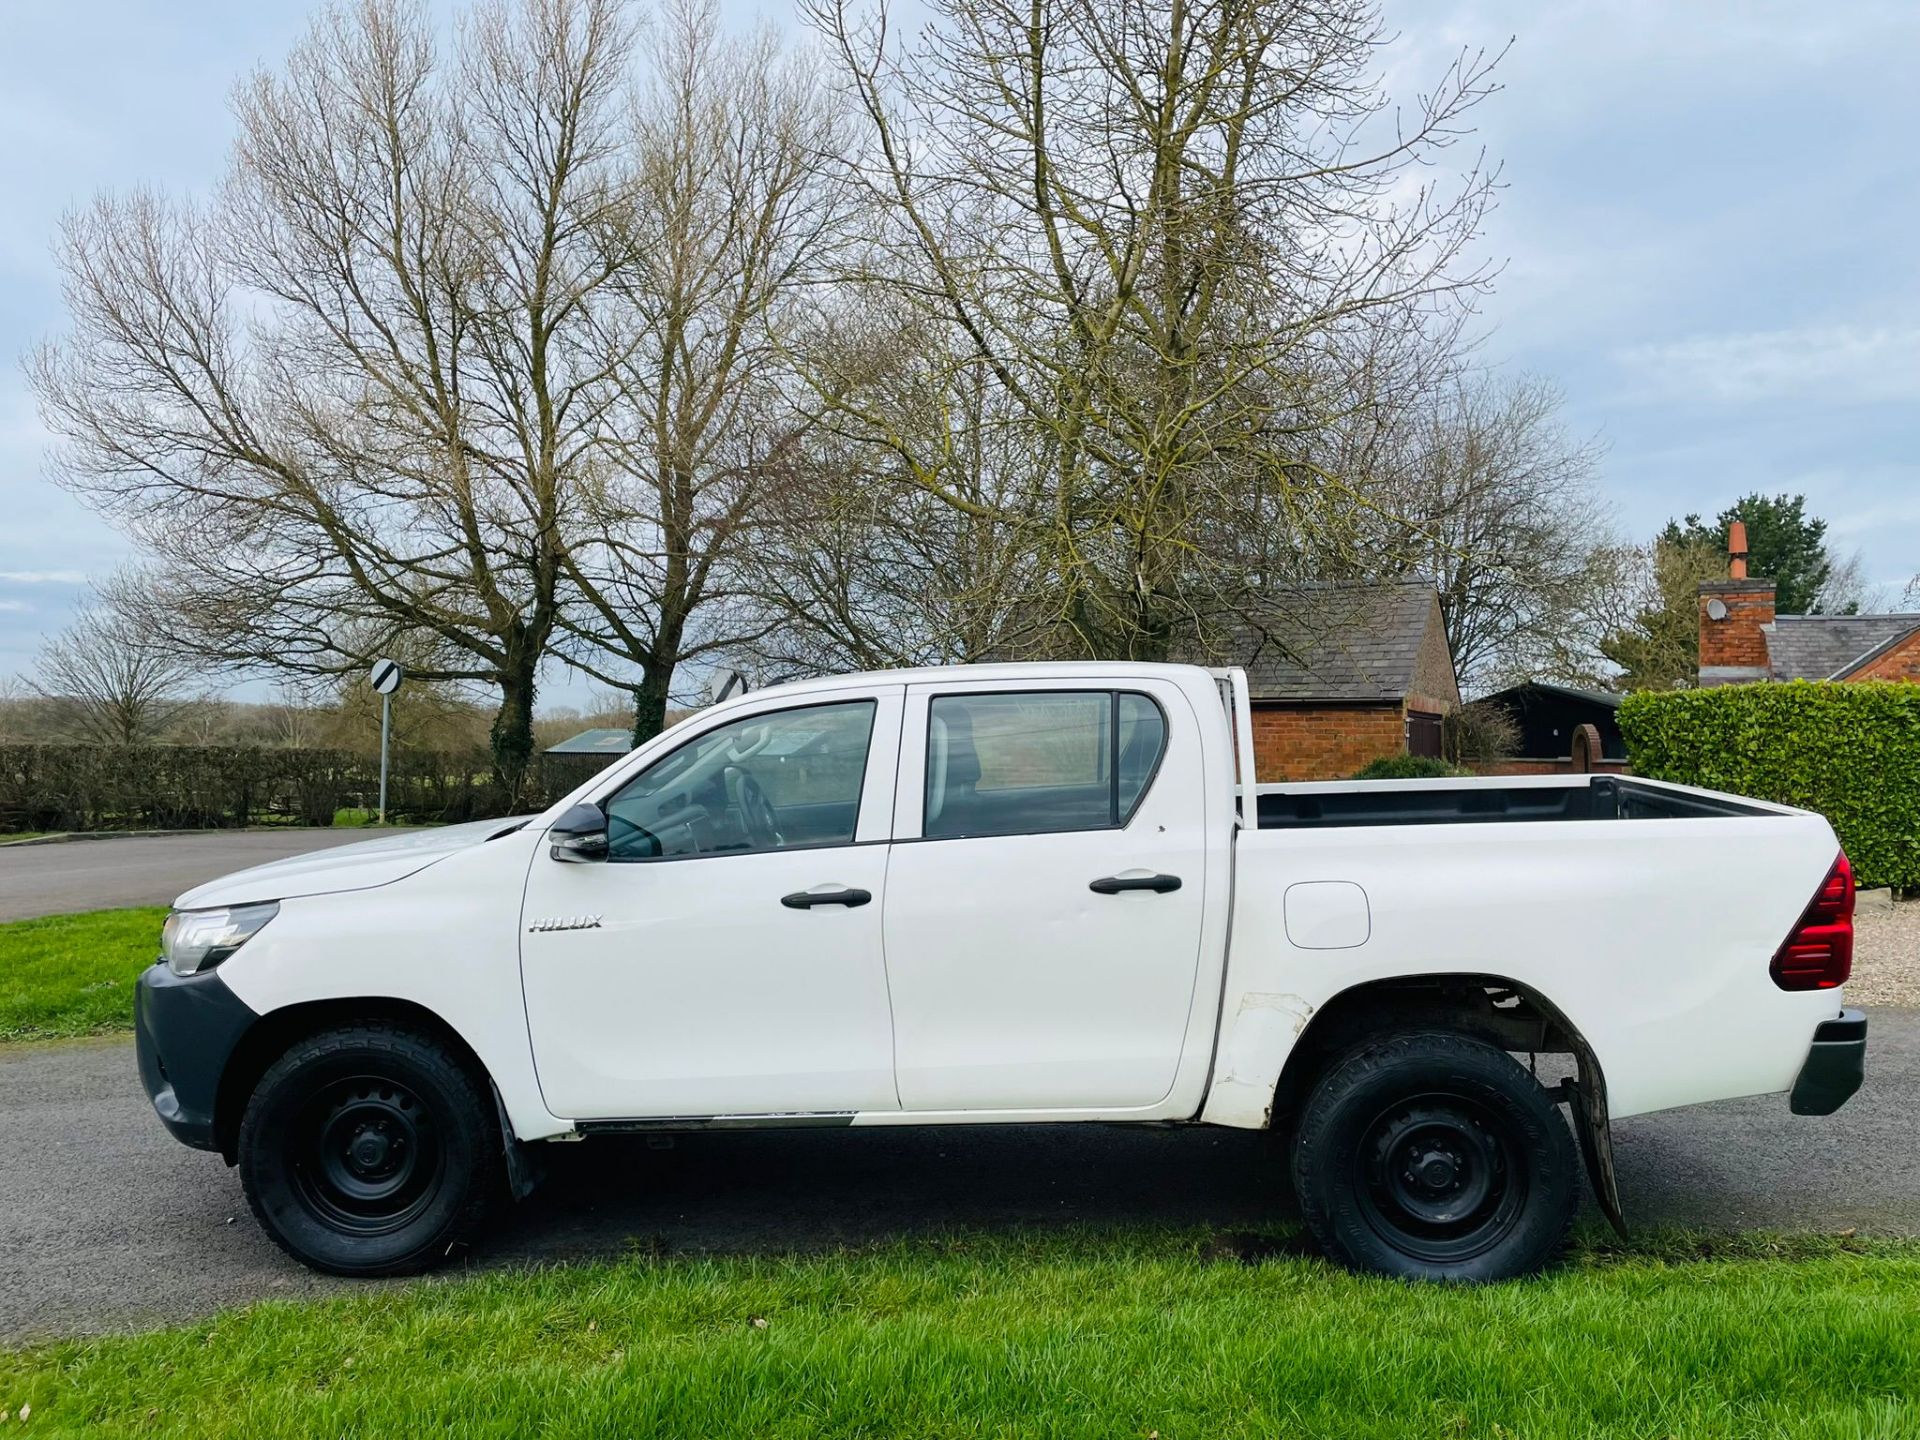 (Reserve Met) TOYOTA HILUX 2.4D-4D "Active" Double Cab Pick Up -18 Reg - 1 Owner - Only 68K Miles - Image 7 of 21